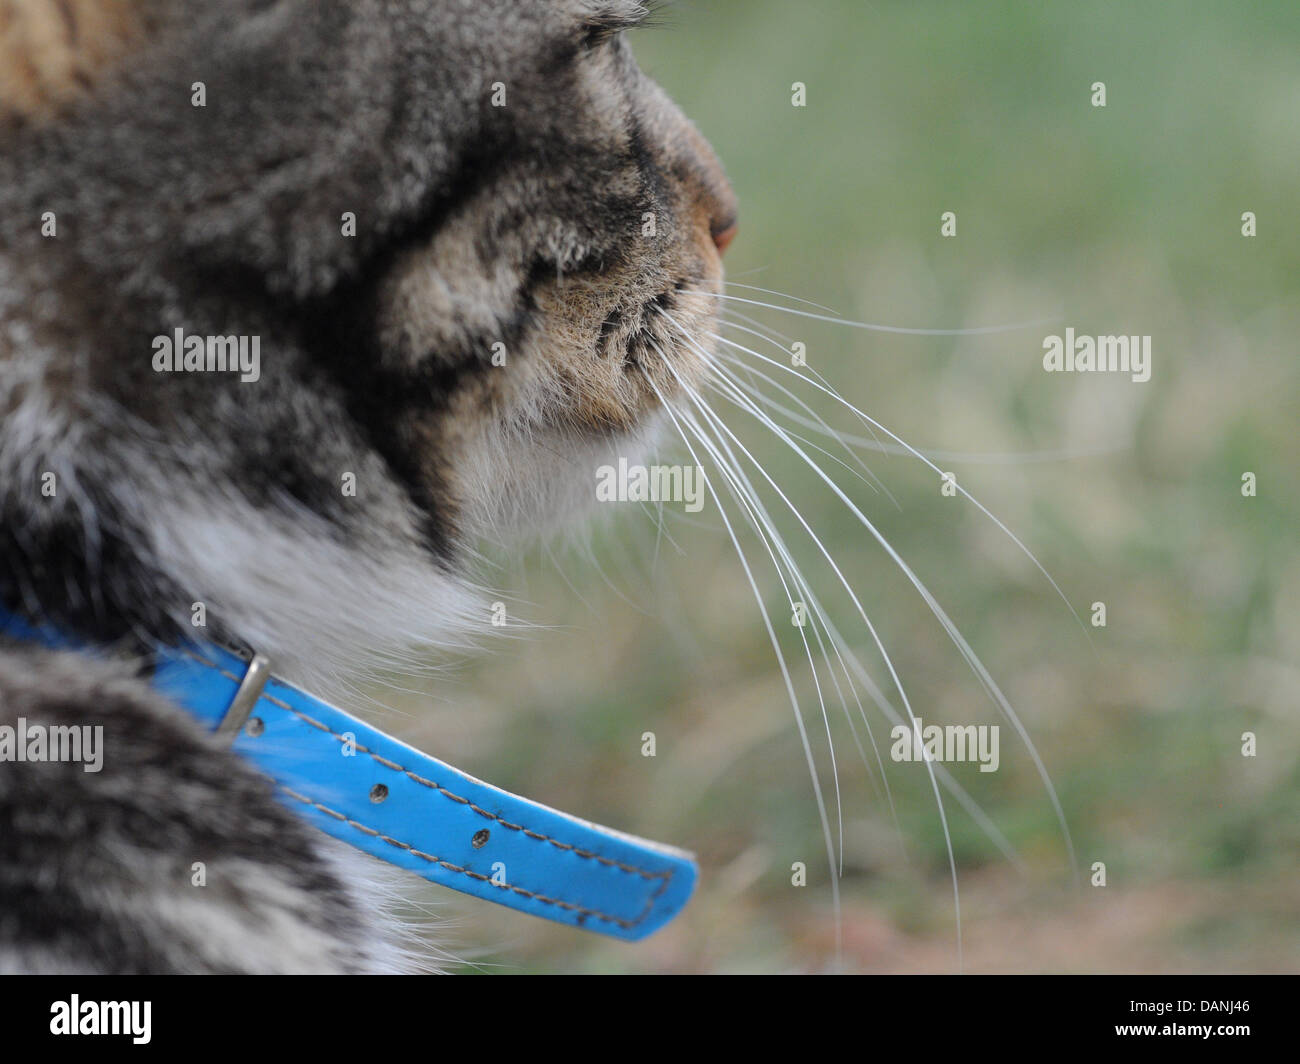 A tabby cat with long whiskers. Stock Photo